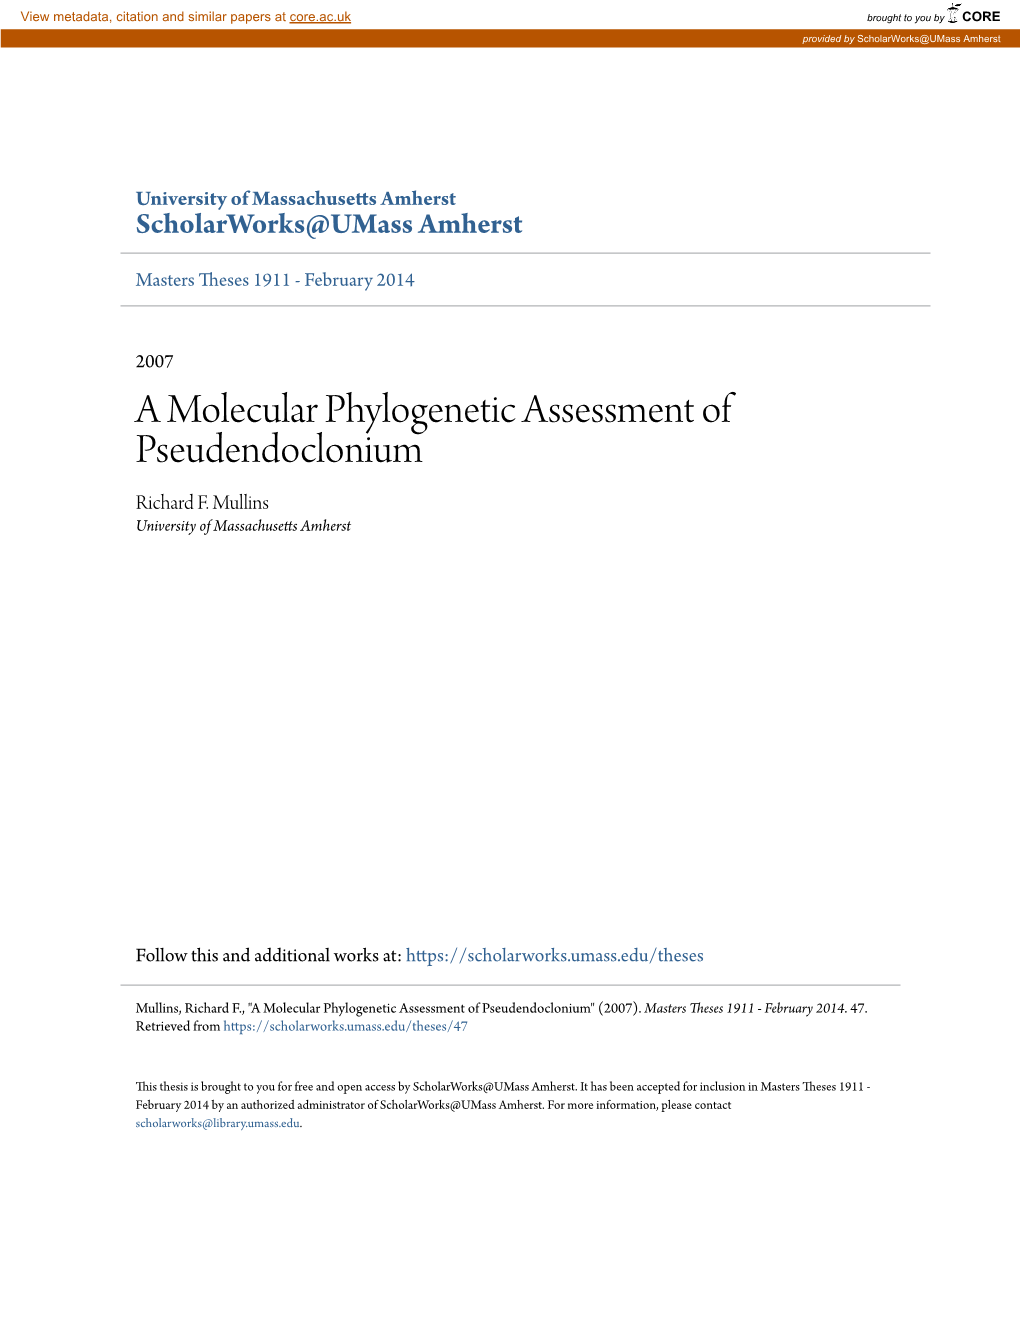 A Molecular Phylogenetic Assessment of Pseudendoclonium Richard F